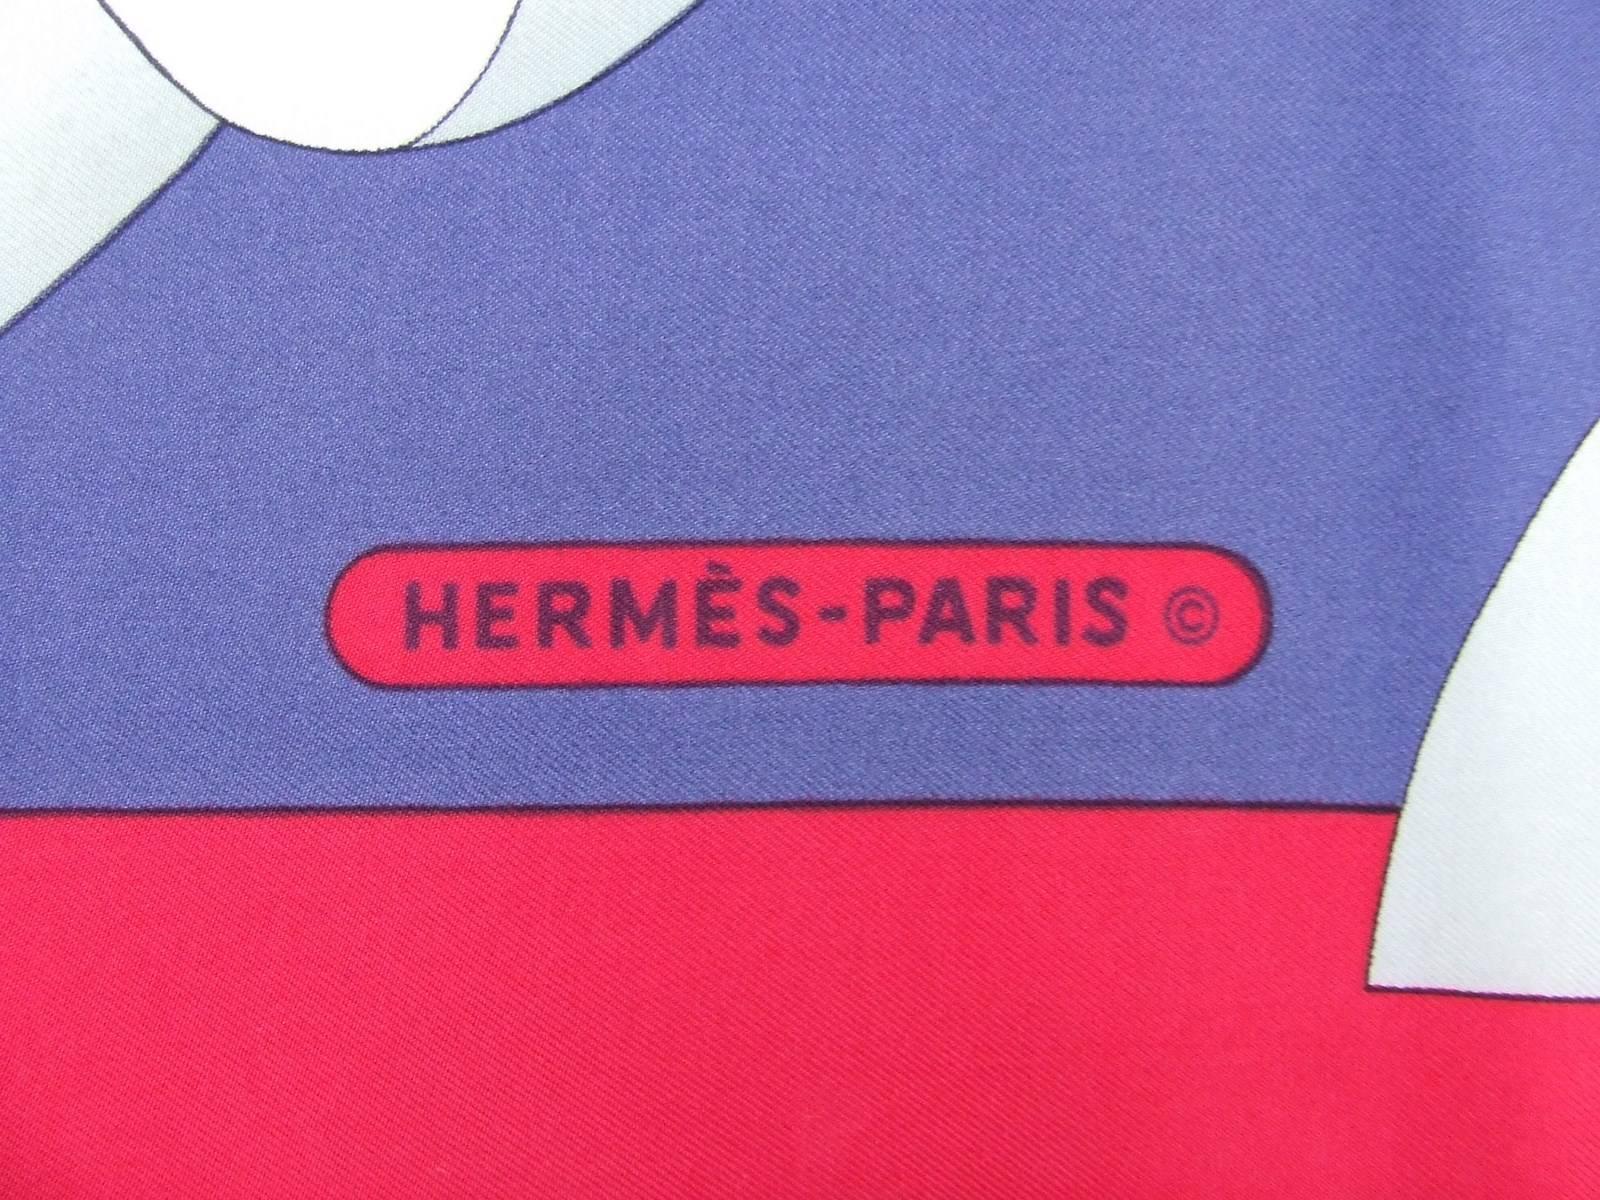 Rare Collectible Authentic Hermès Vintage Scarf

Called 